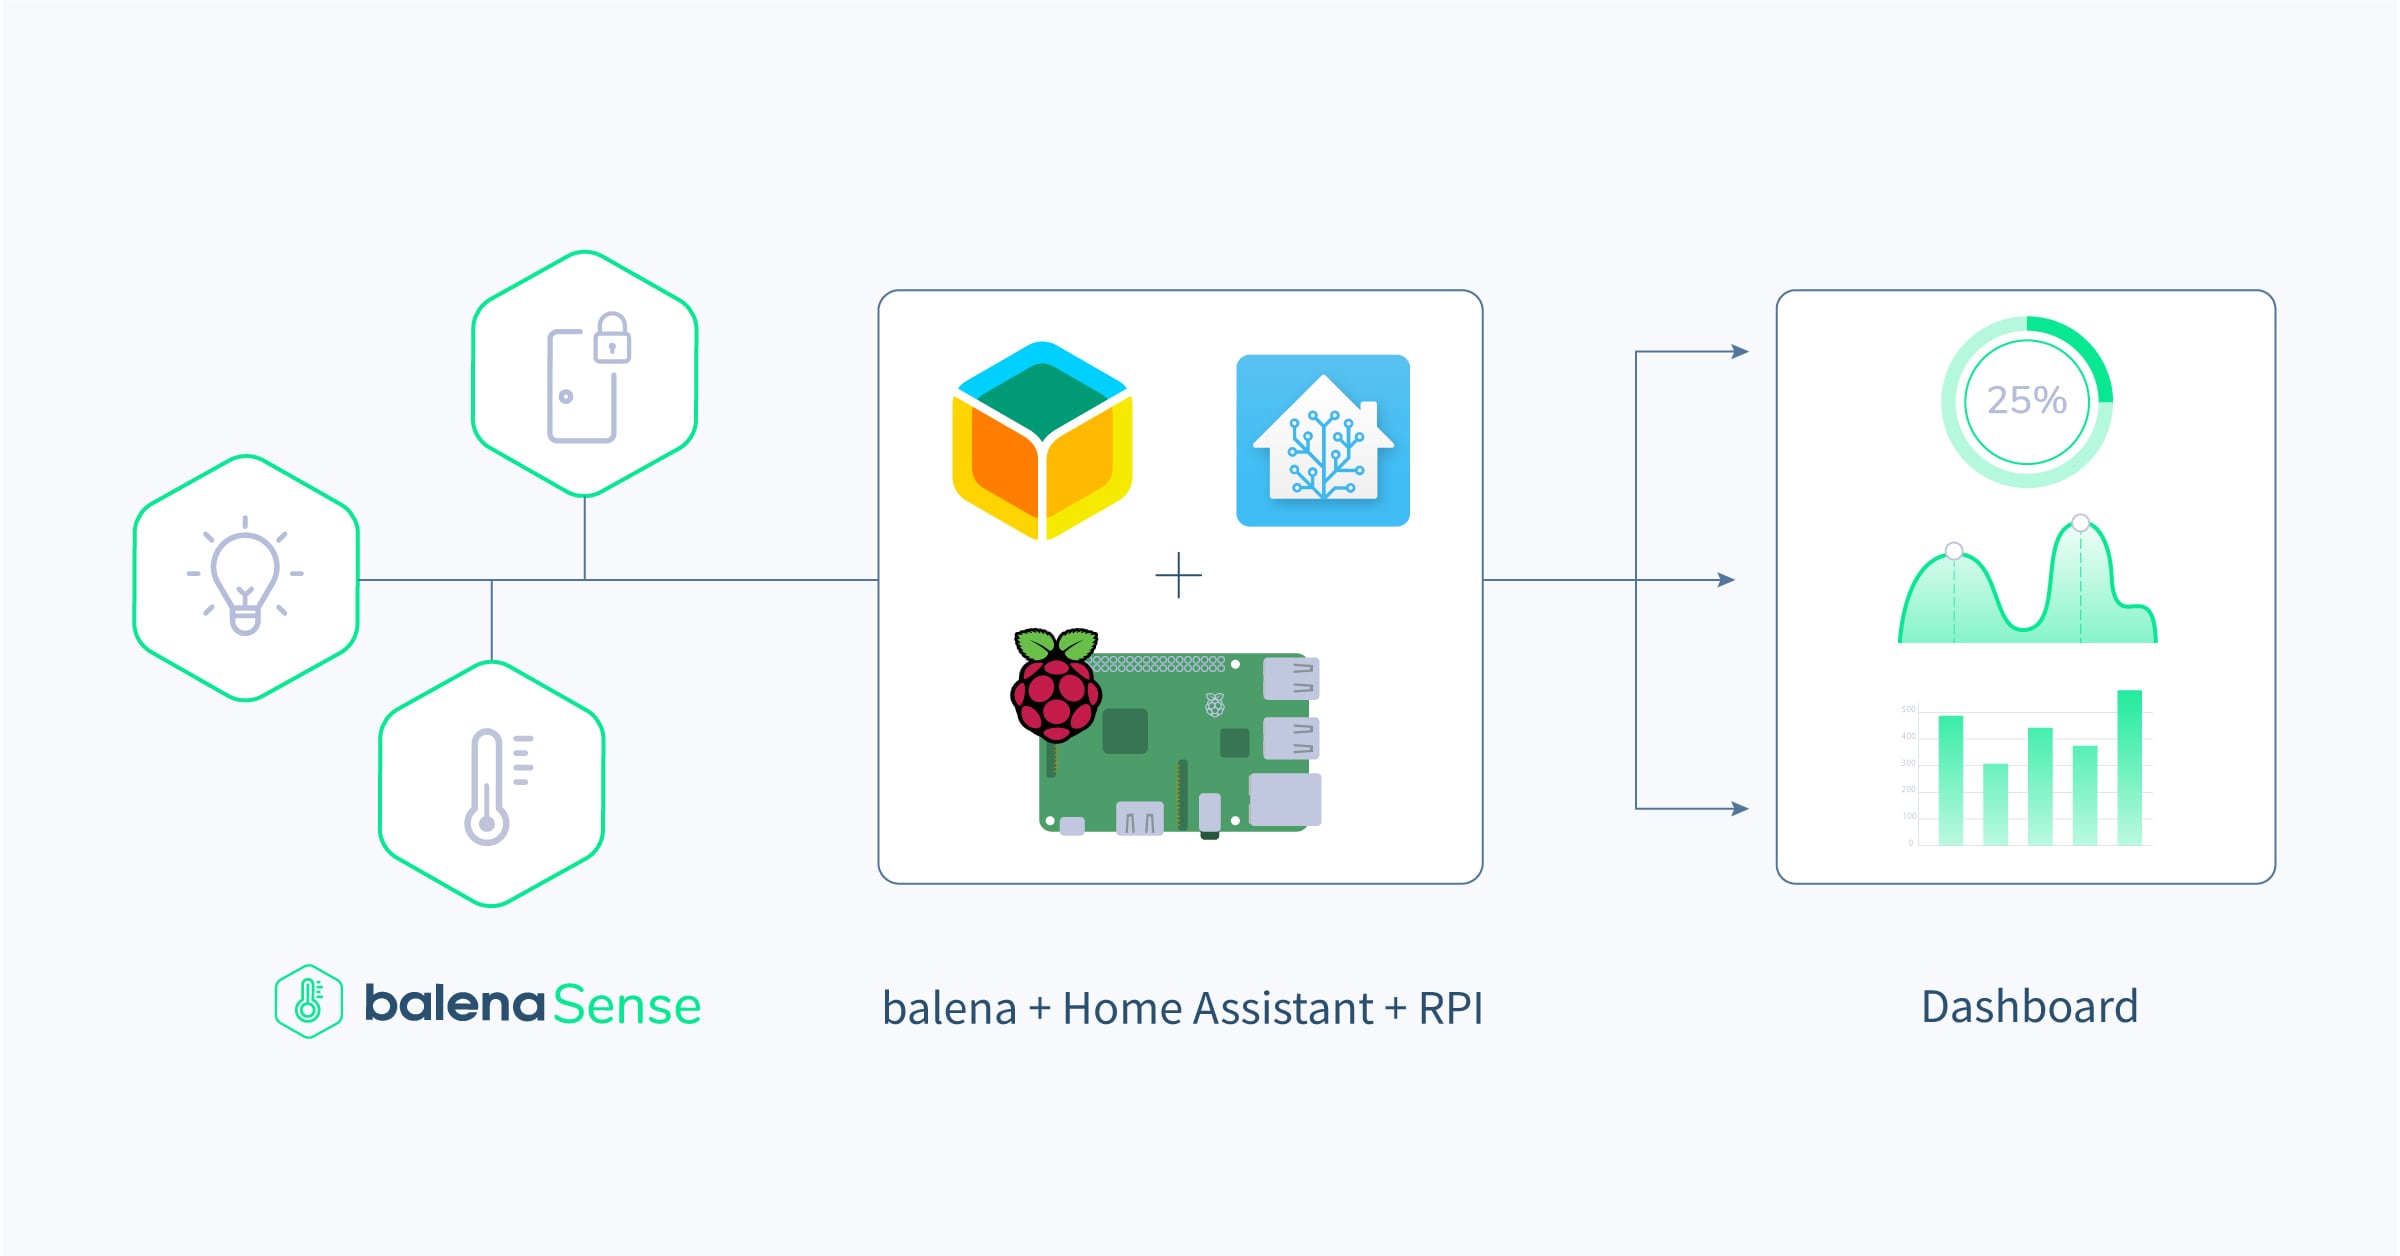 Monitor air quality around your home with Home Assistant and balena